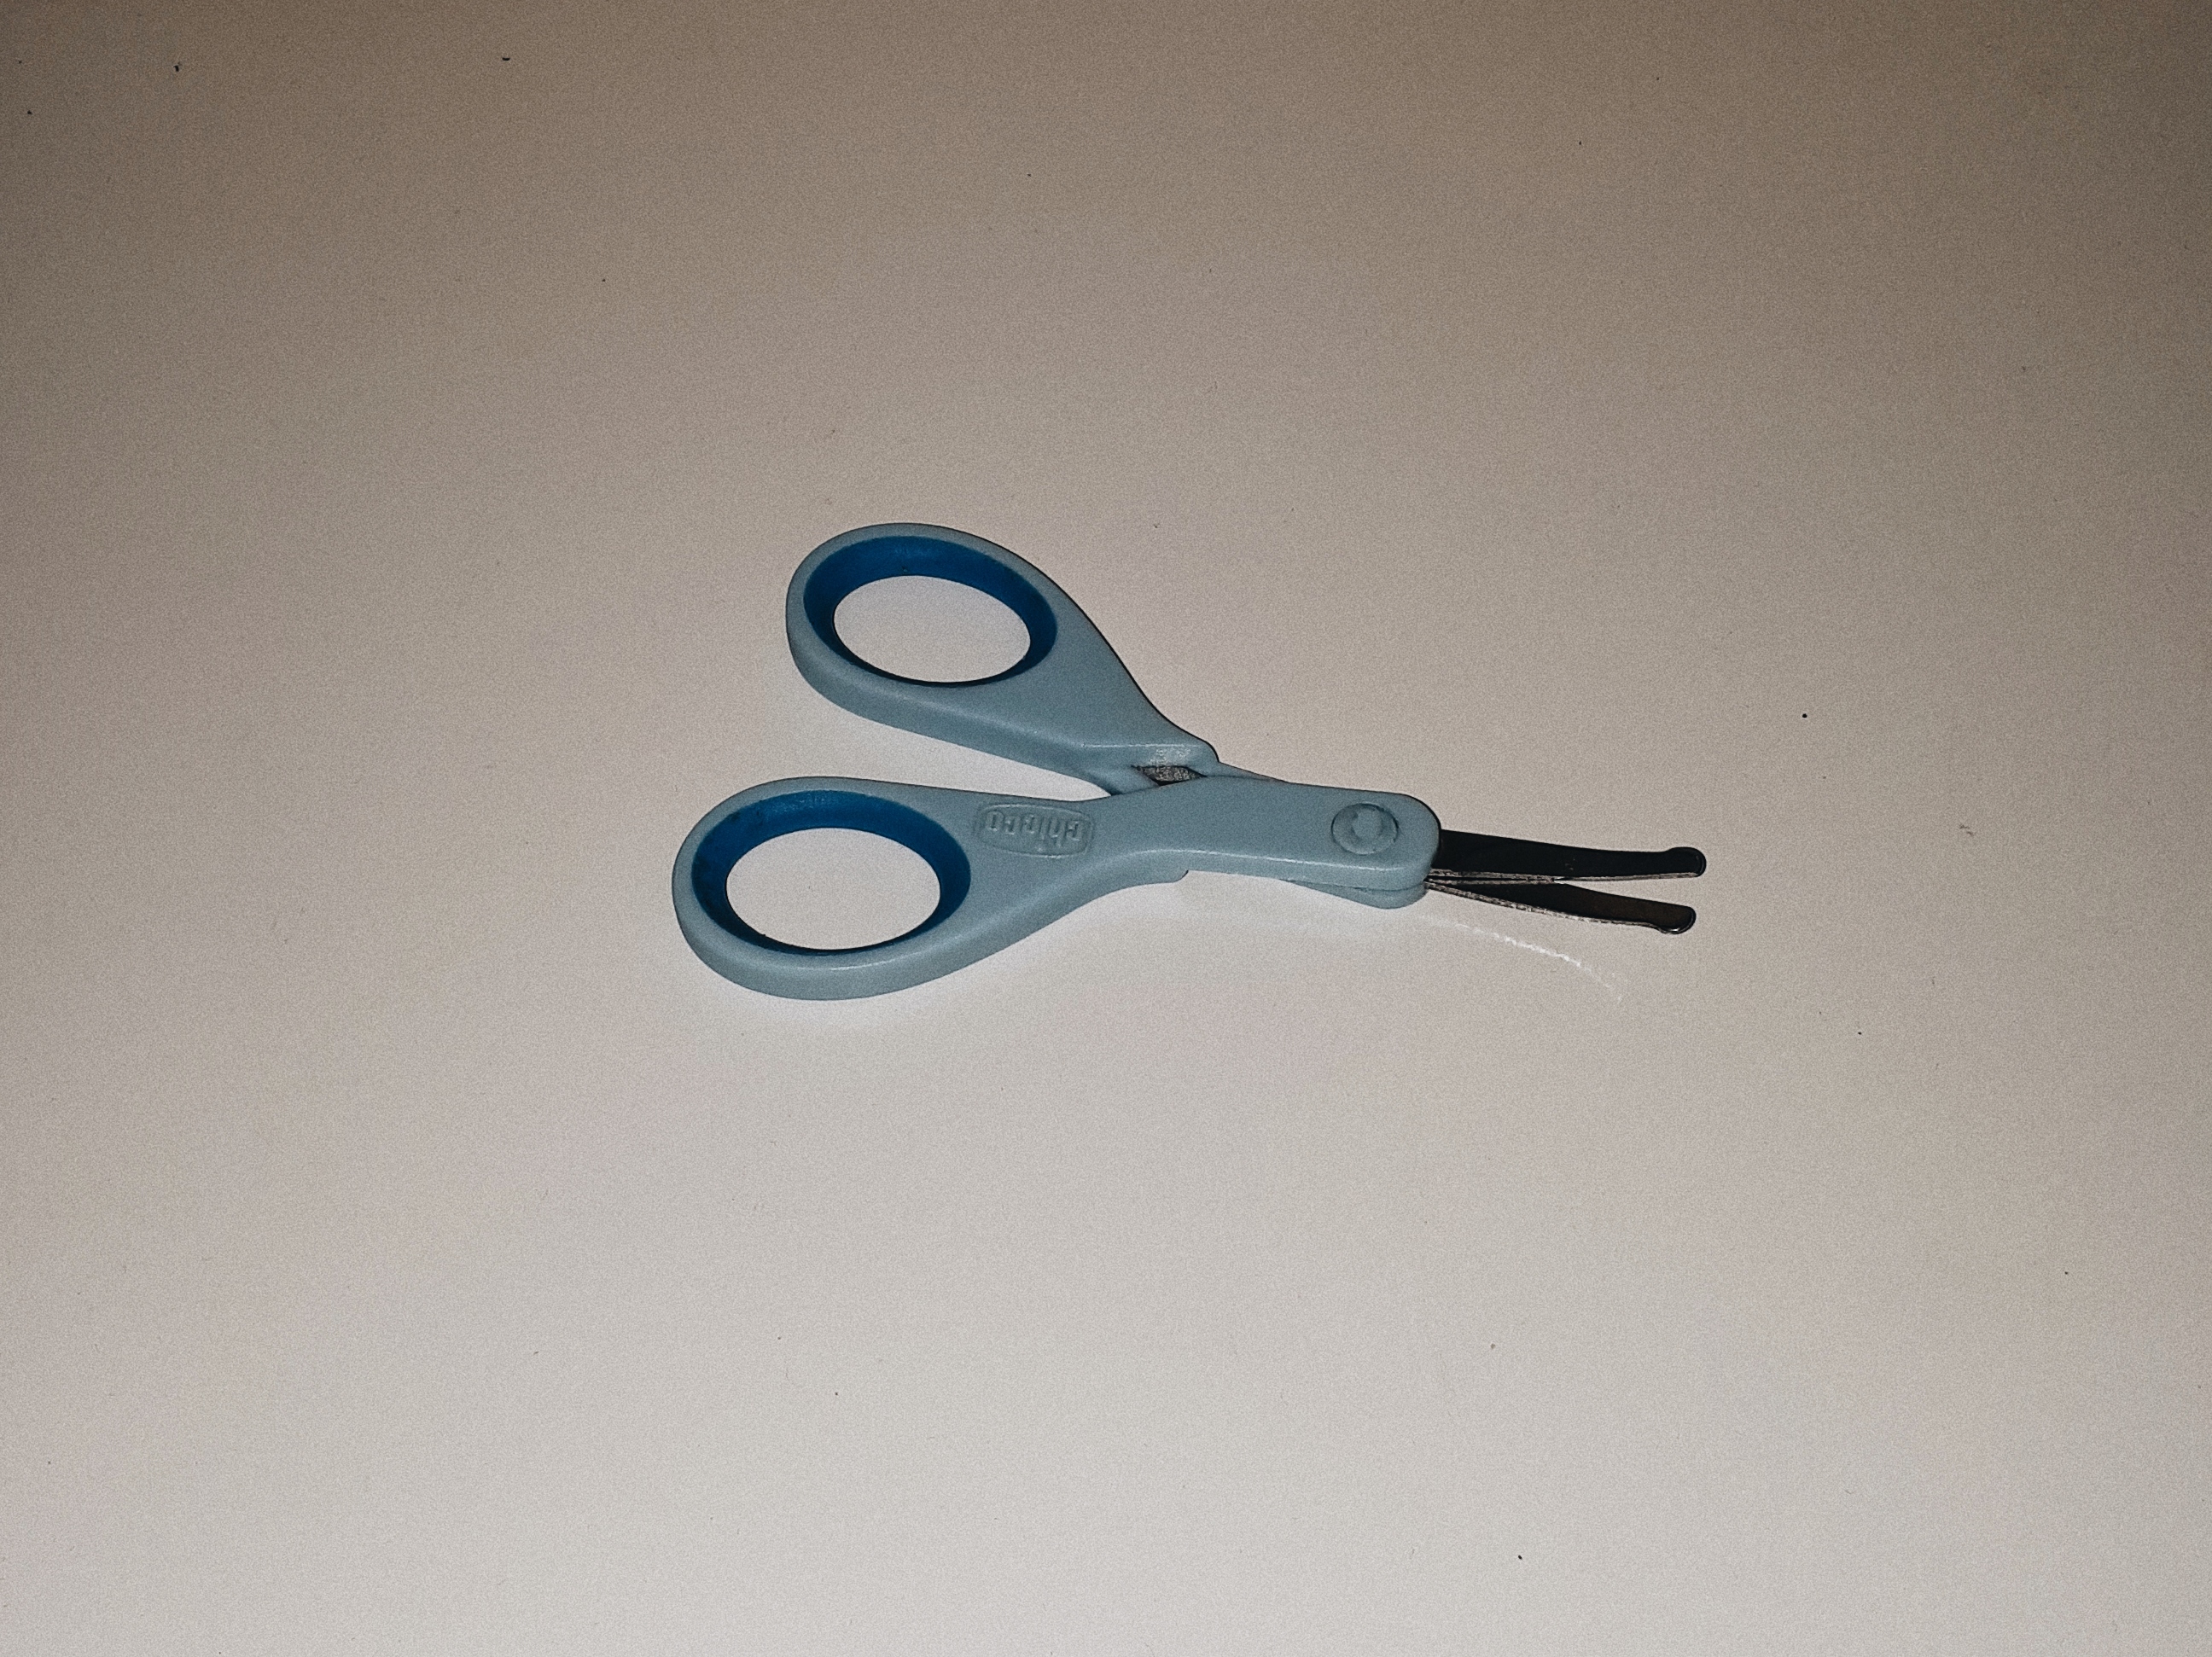 Baby nail Scissors by Chicco